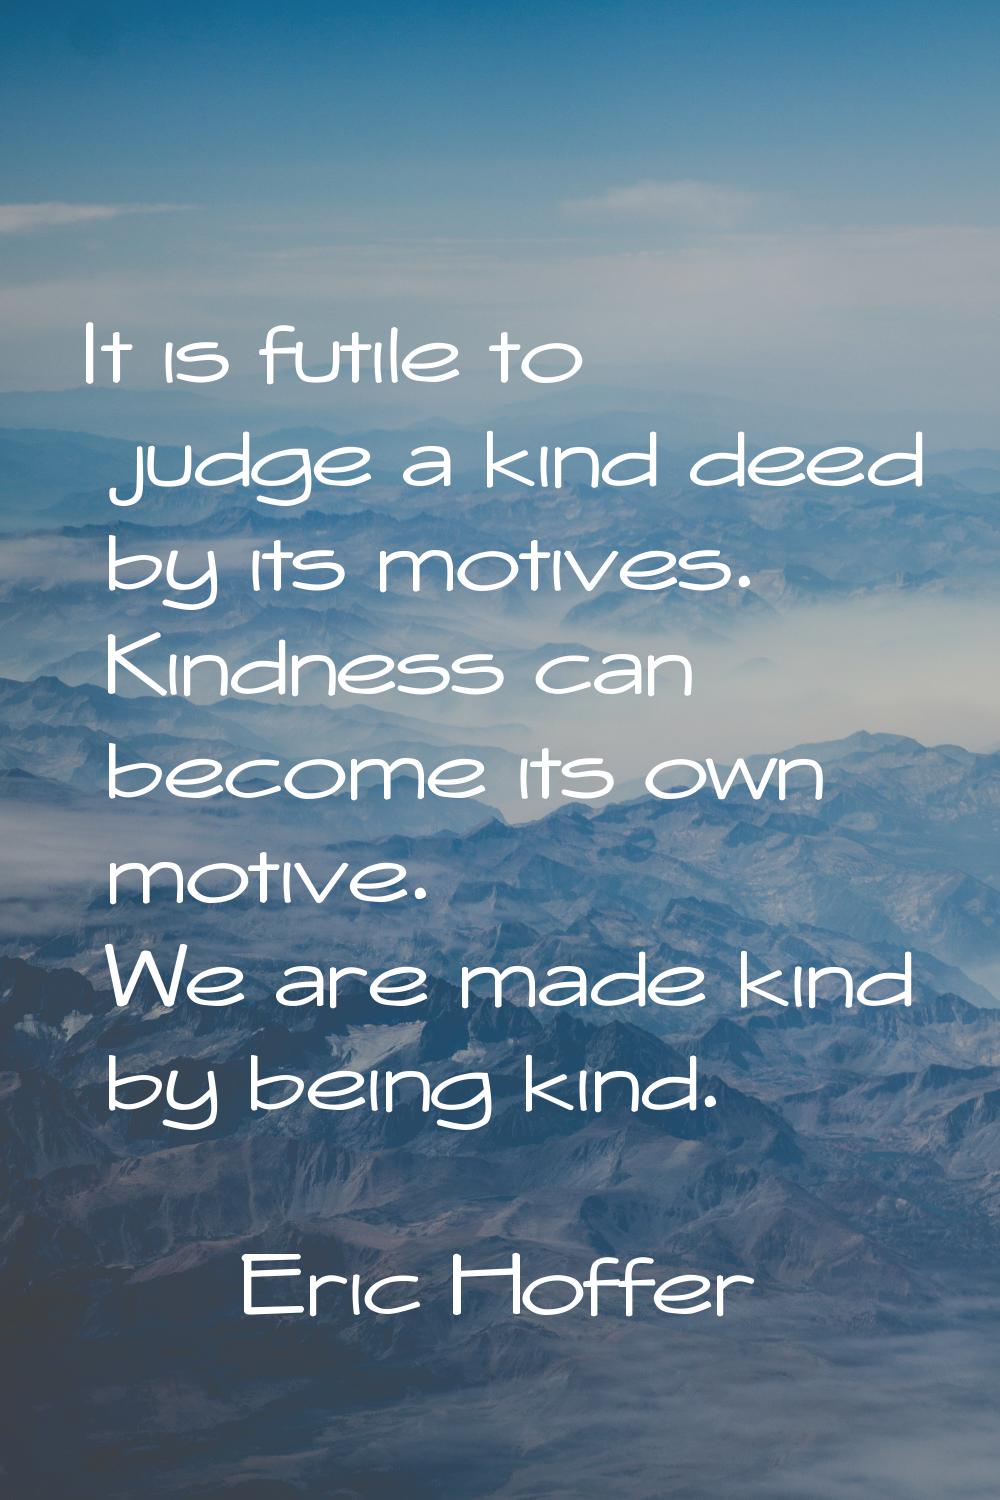 It is futile to judge a kind deed by its motives. Kindness can become its own motive. We are made k